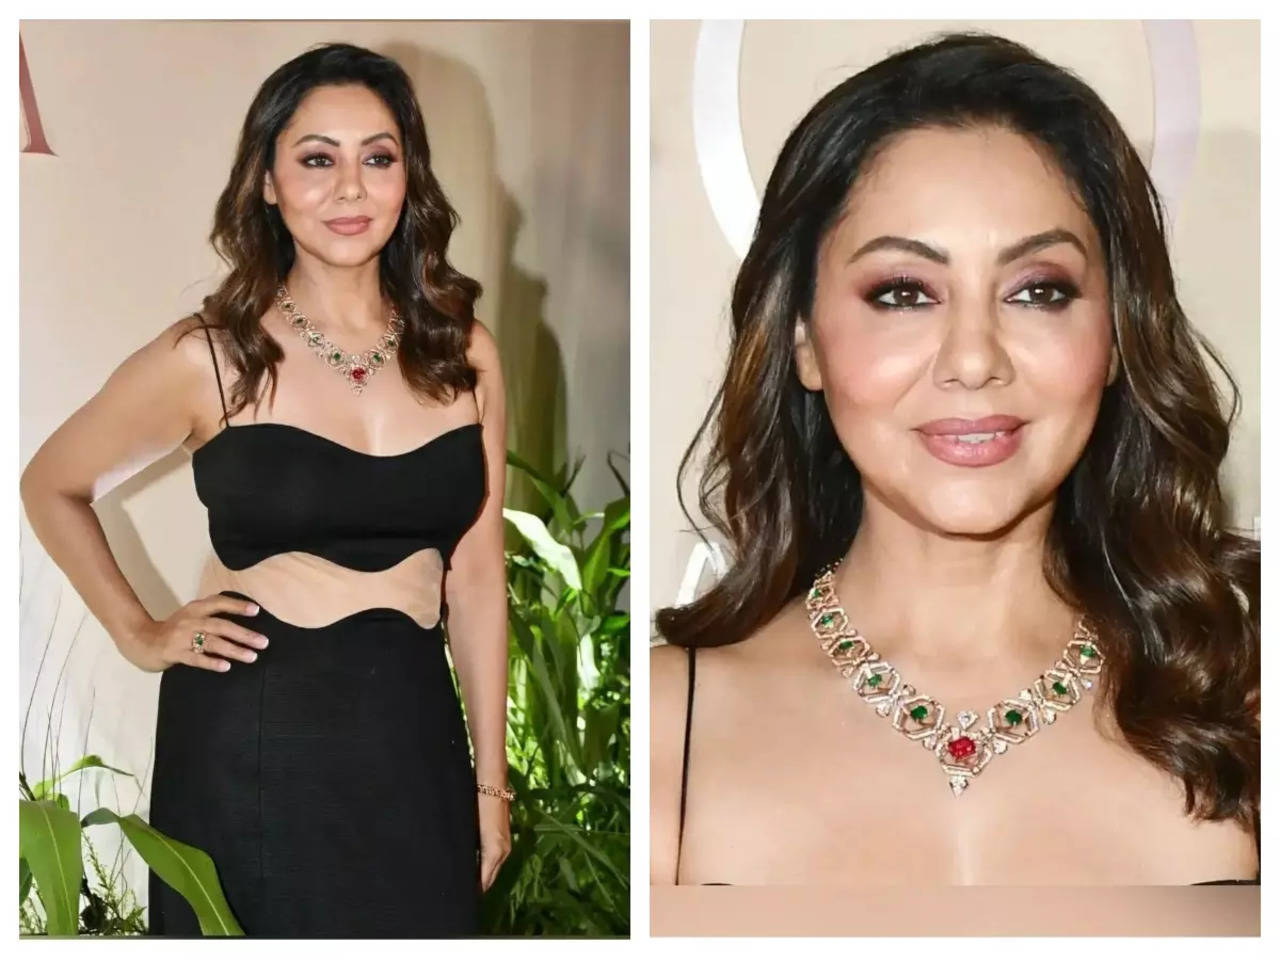 Shah Rukh Khans wife Gauri Khan looks bewitching in a gorgeous black outfit as she attends an event in the city; fans call her Queen